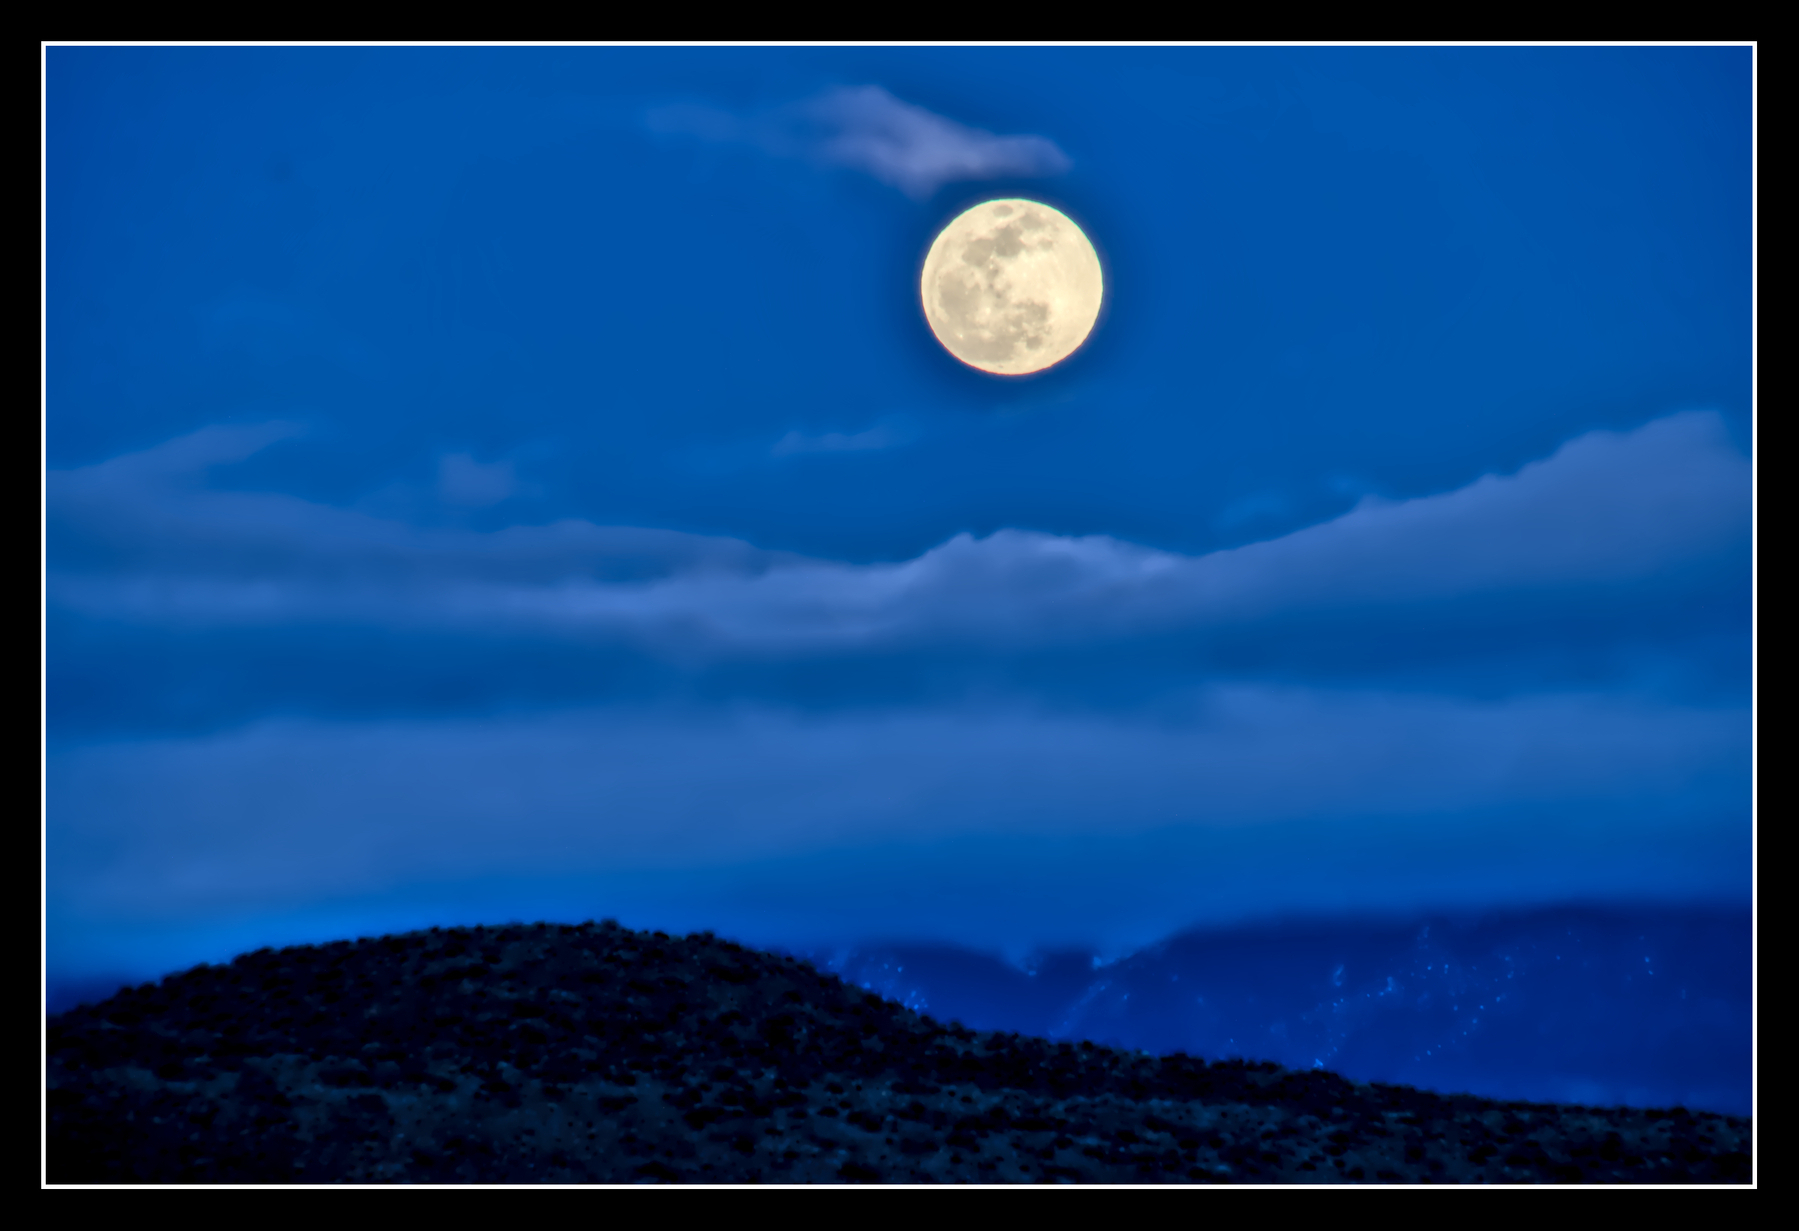 Moonrise, the moon is full and white, while the landscape is blue with evening light.